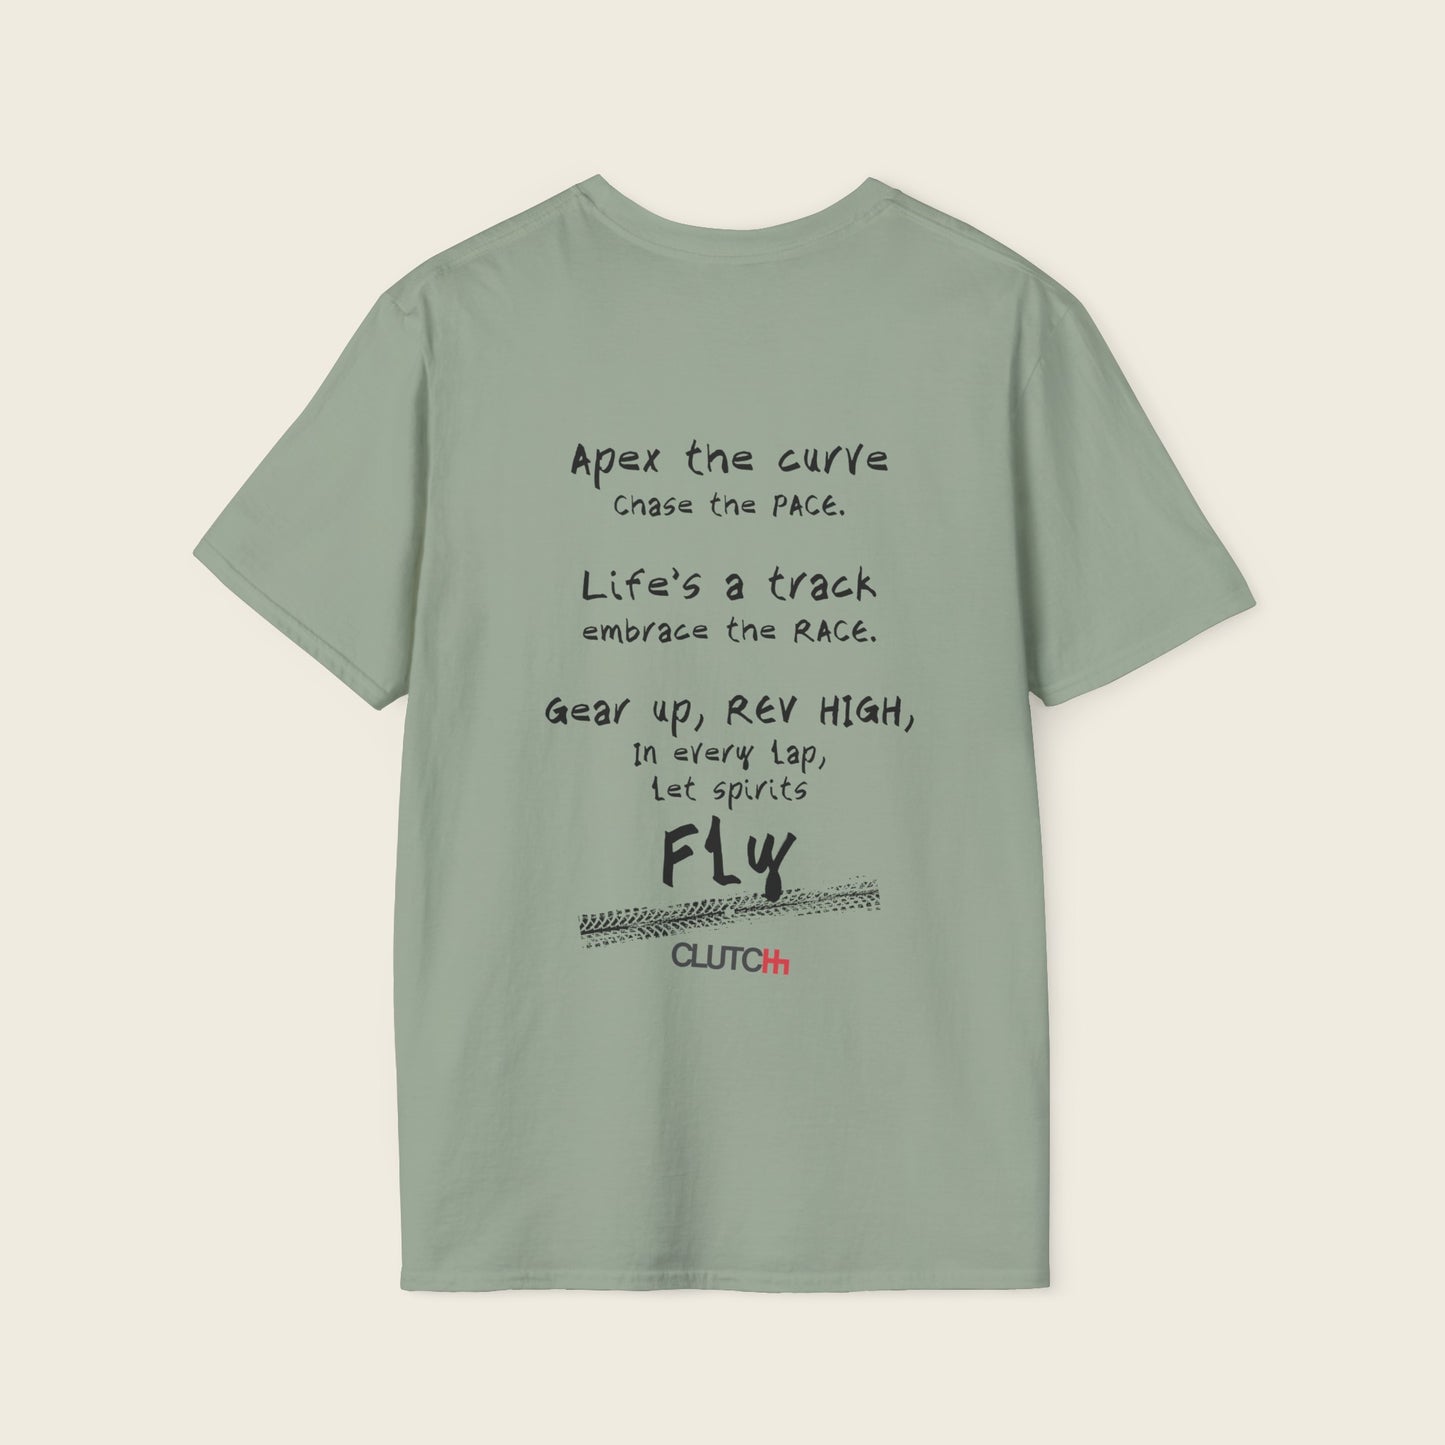 In Every Lap, Let Spirits Fly Shirt | Clutchcloth Automotive Apparel